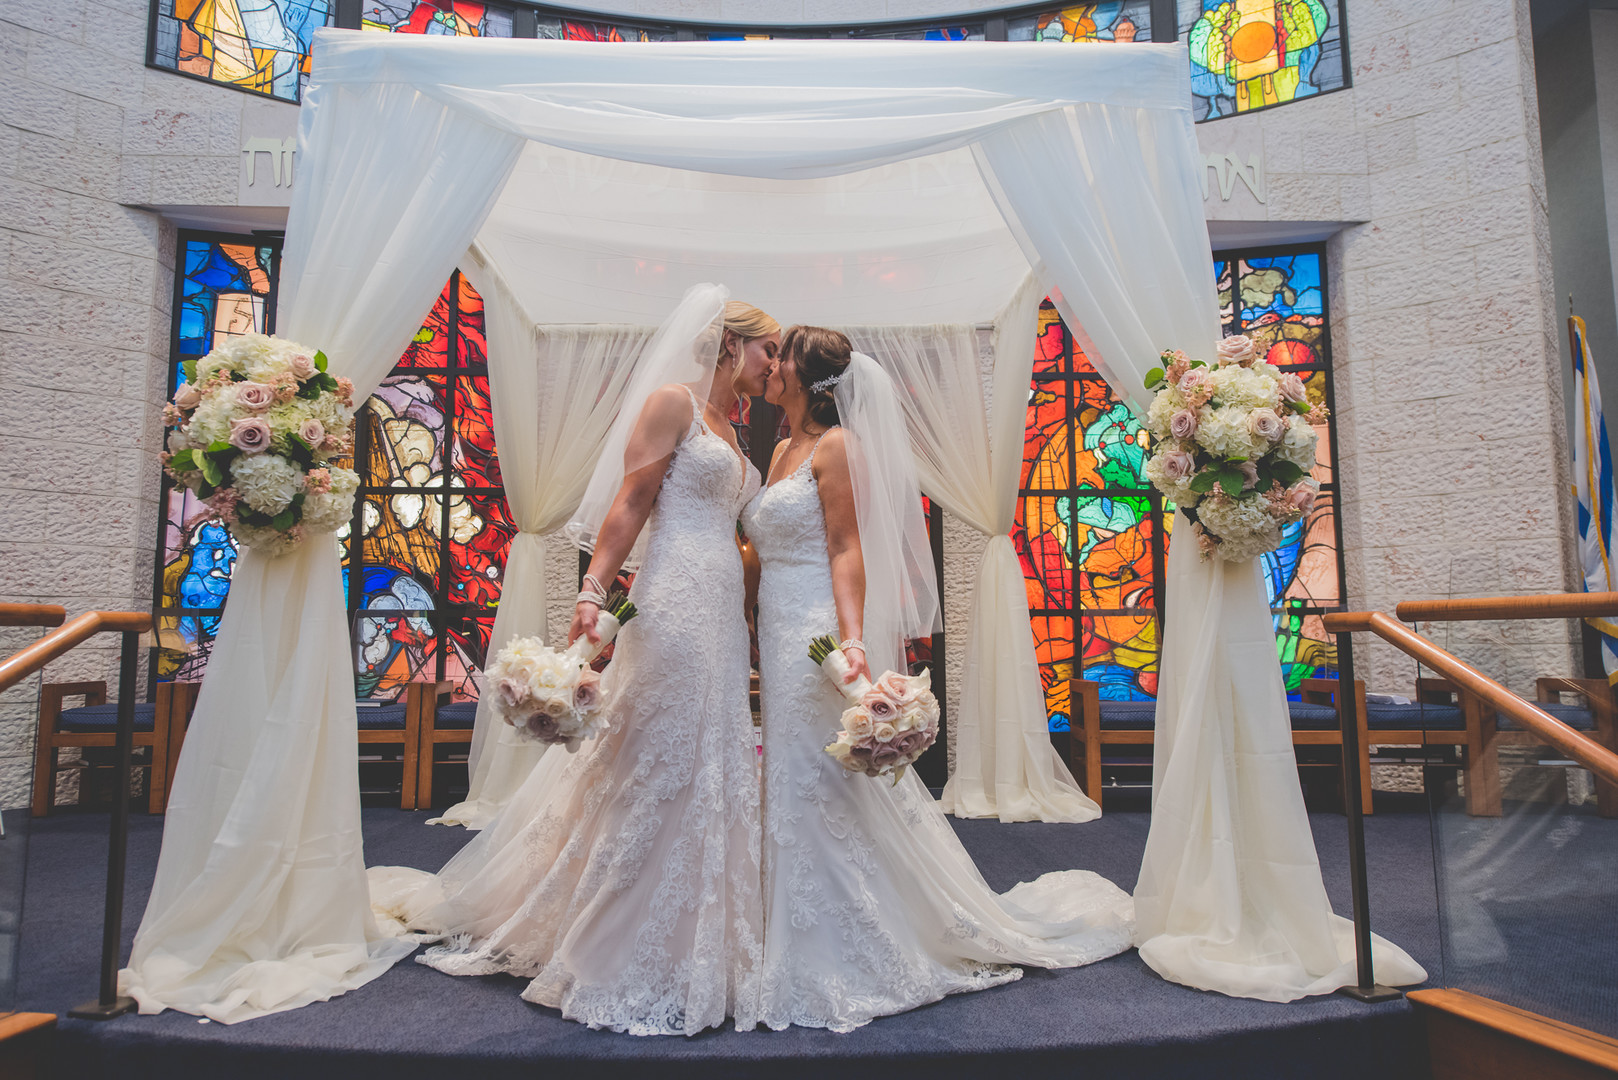 Traditional Jewish wedding during Pride Month two brides up-do long white lace dresses vows kiss